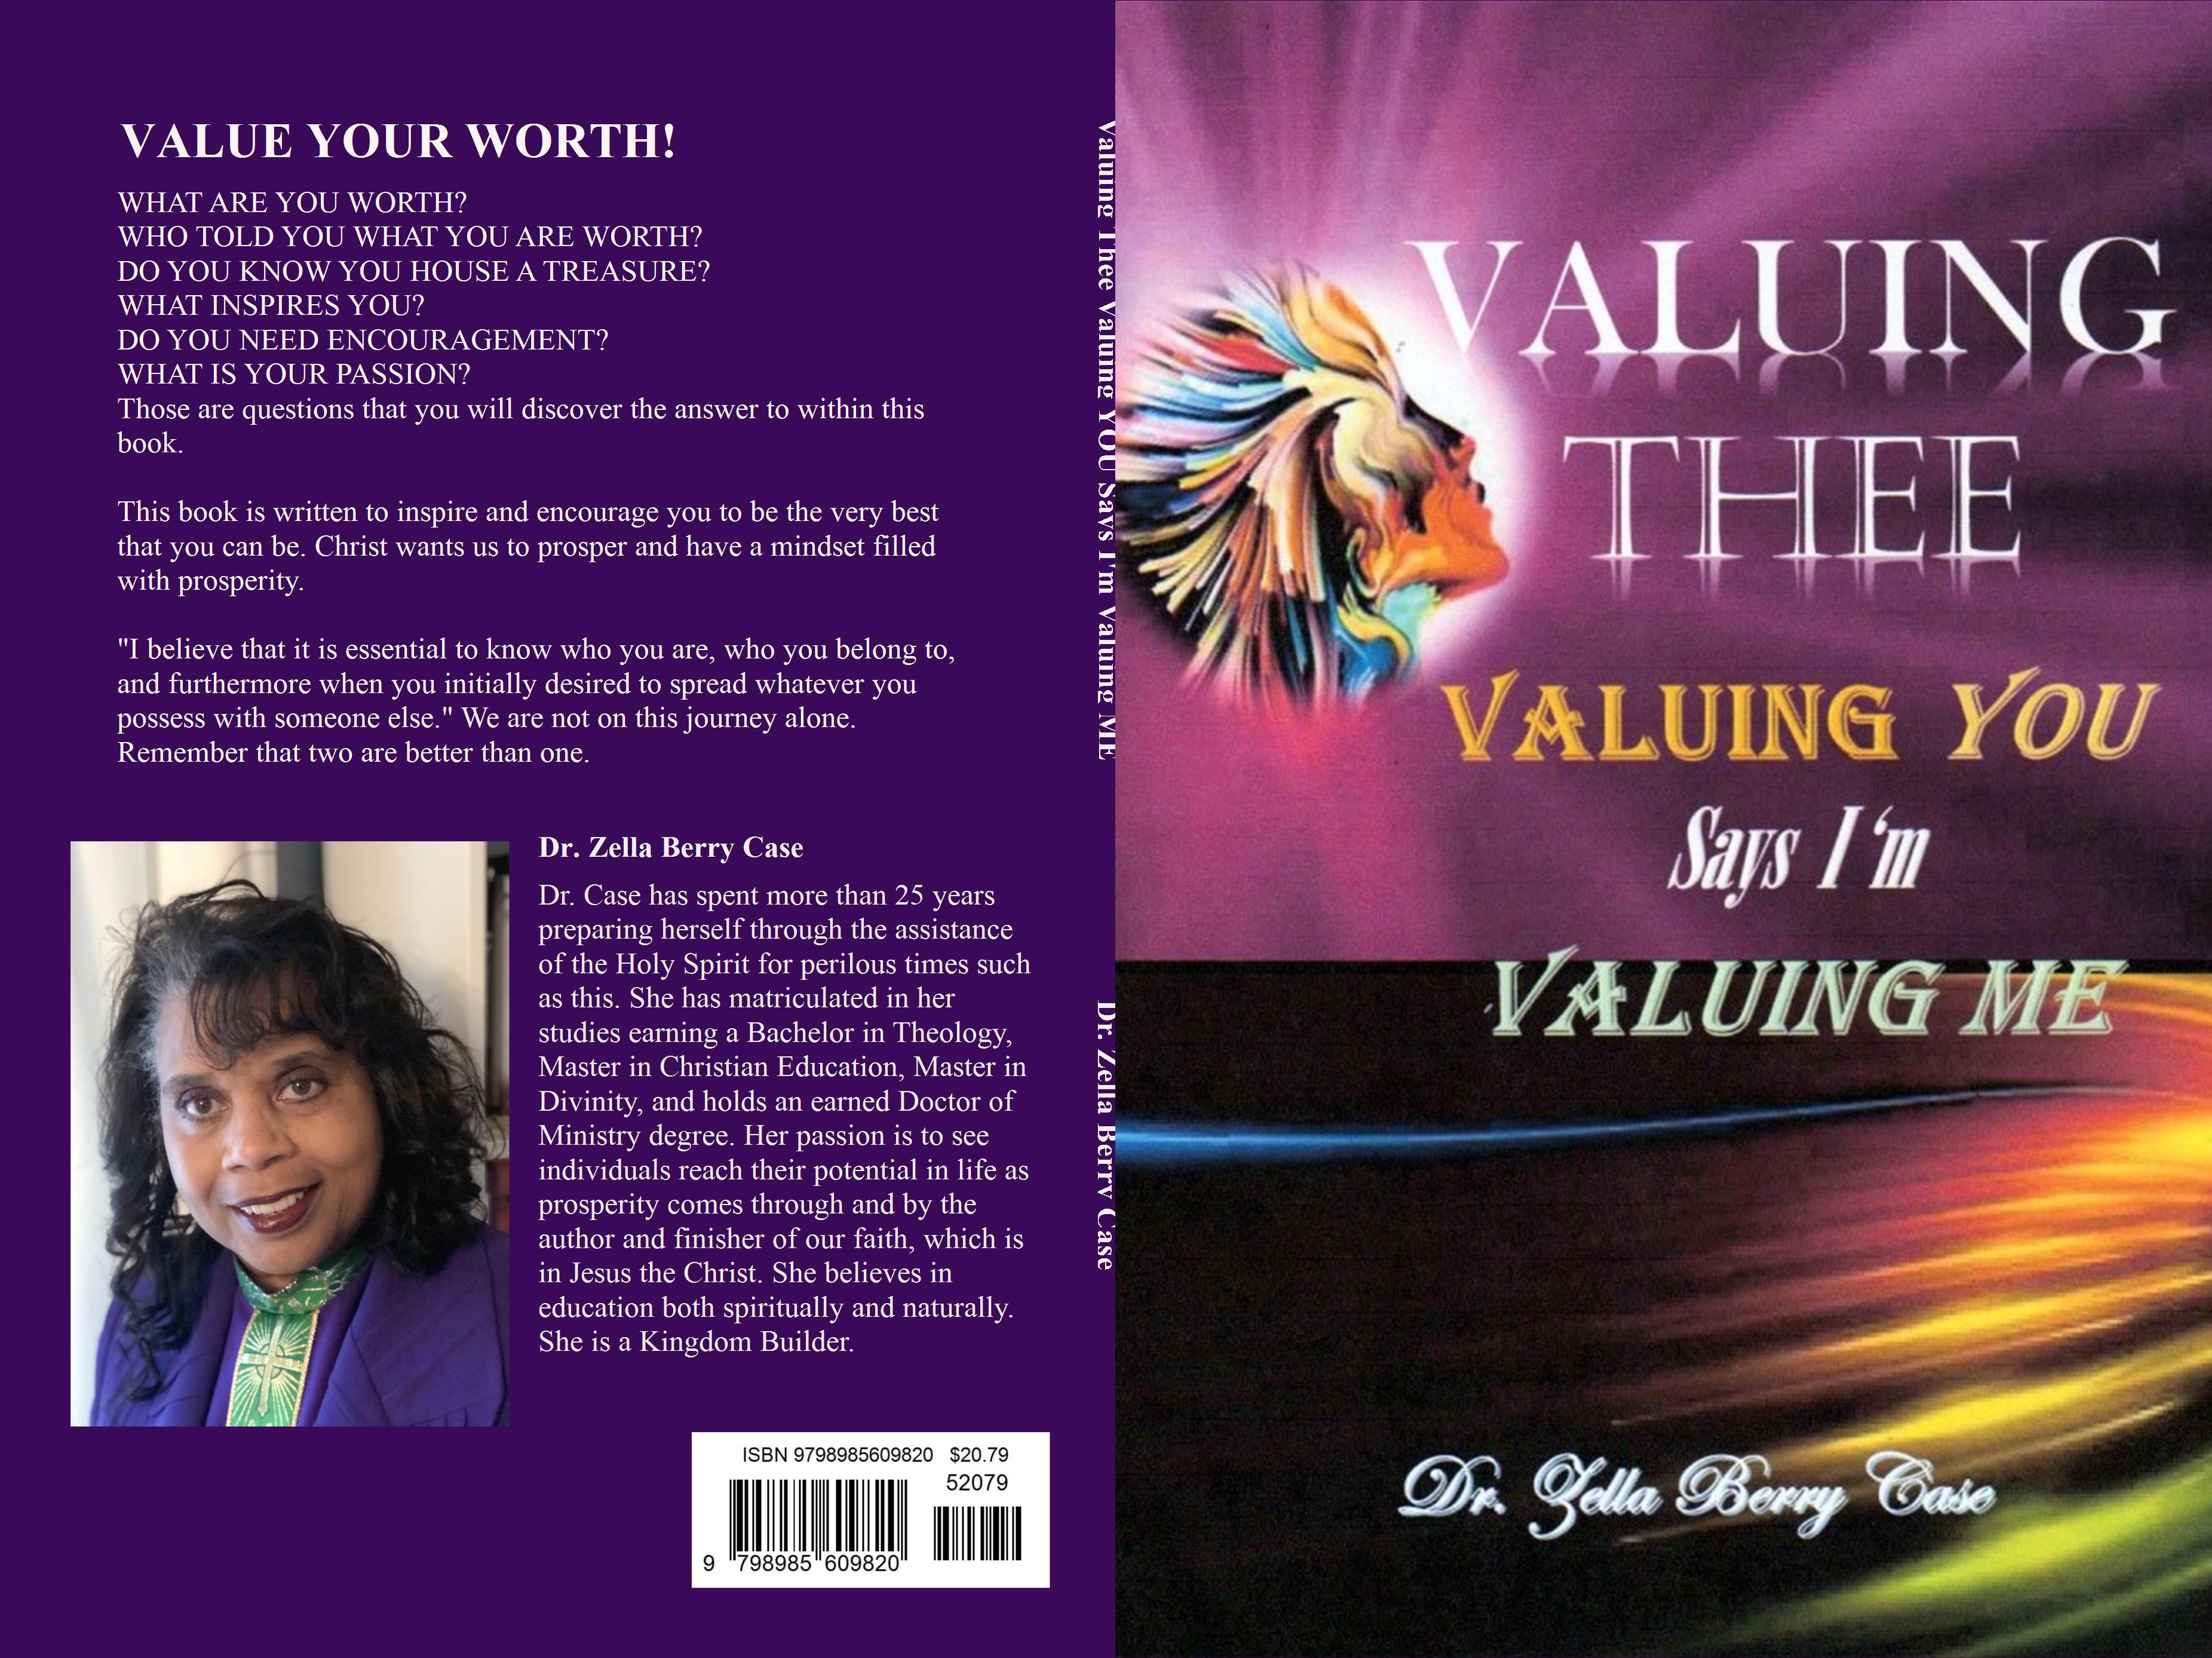 Valuing Thee valuing you I